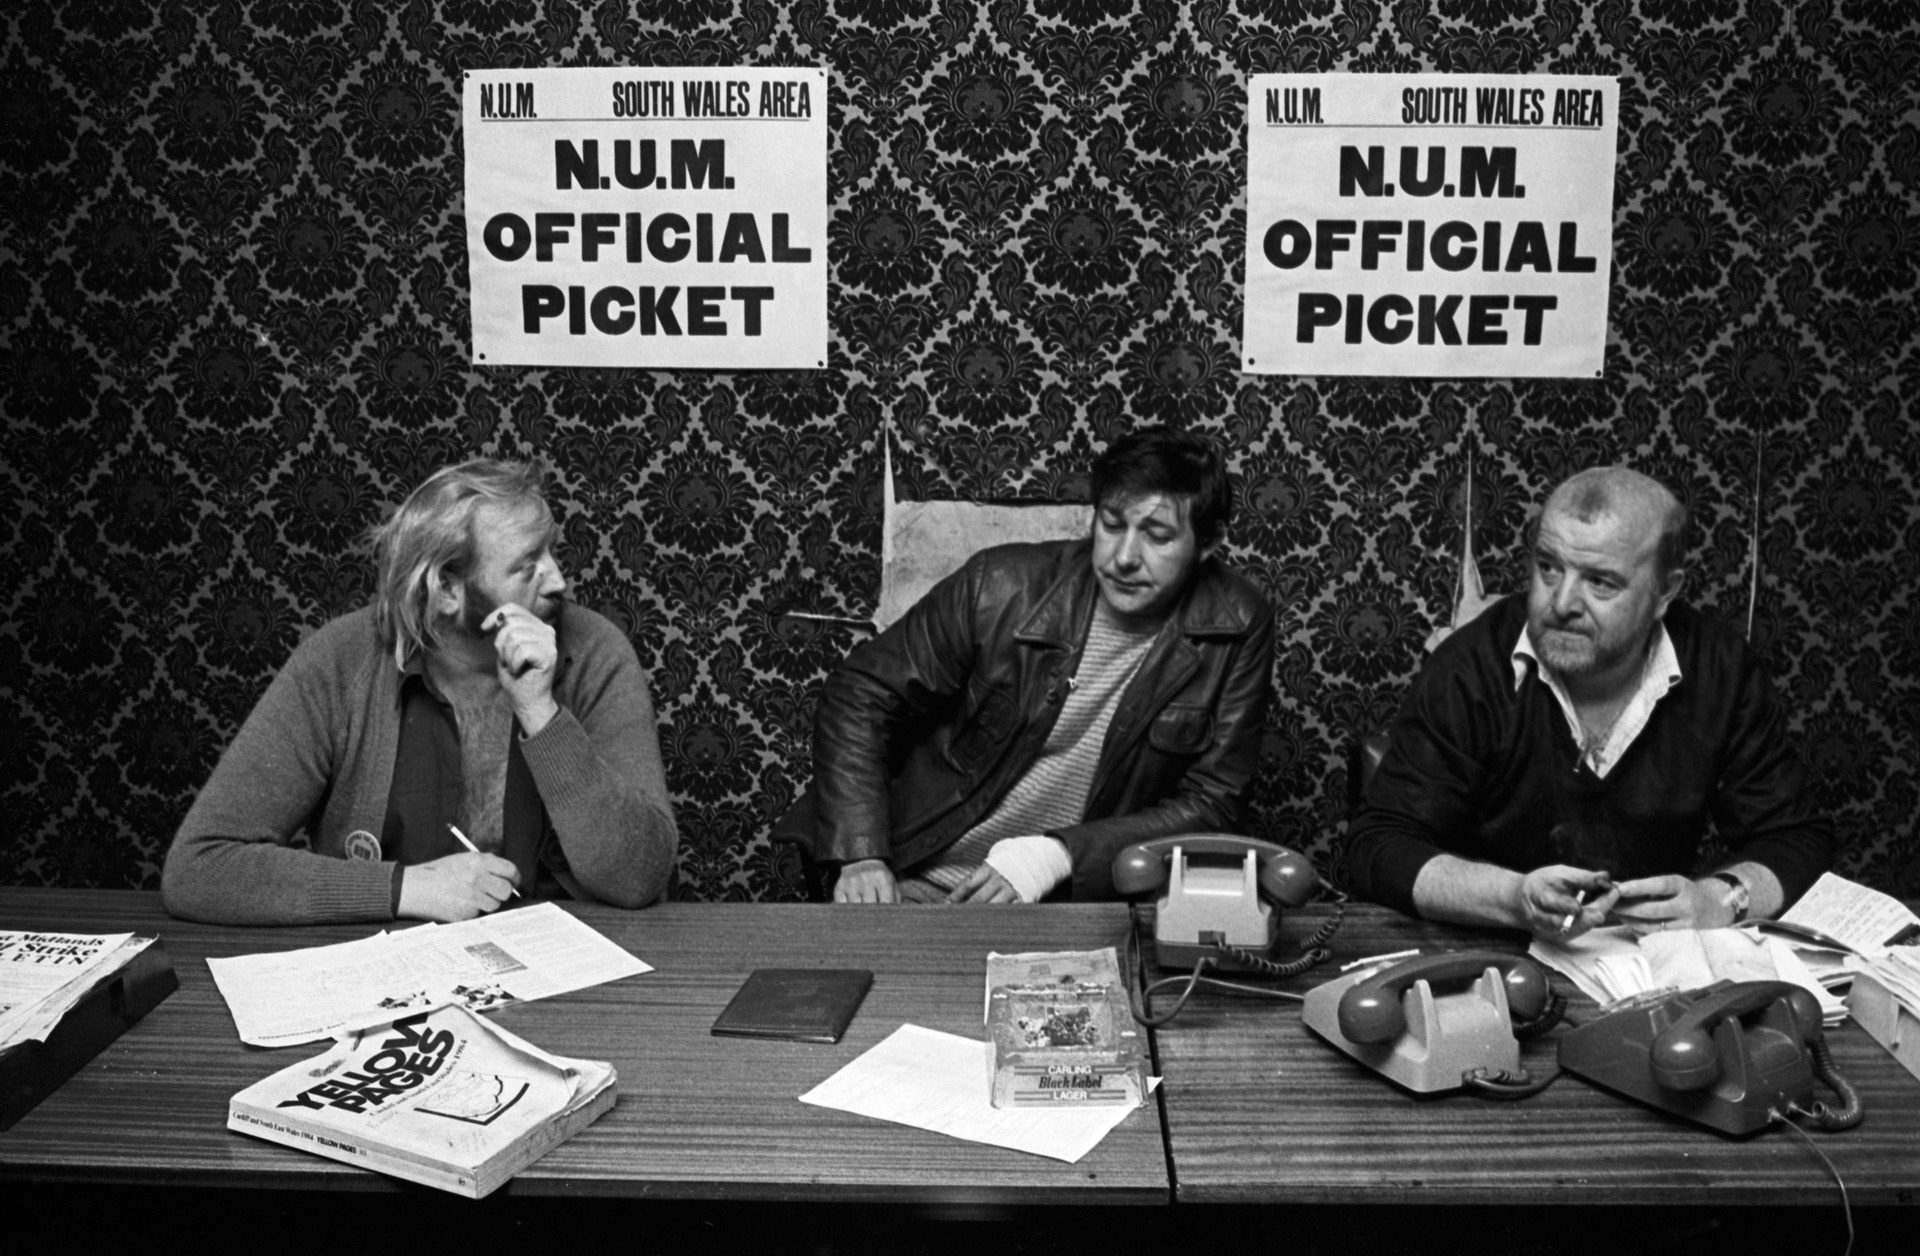 Black and white photograph of three union officials sat at a desk covered in phones and a Yellow Pages book, with two signs that read 'N.U.M Official Picket' stuck to a patterned wall behind them